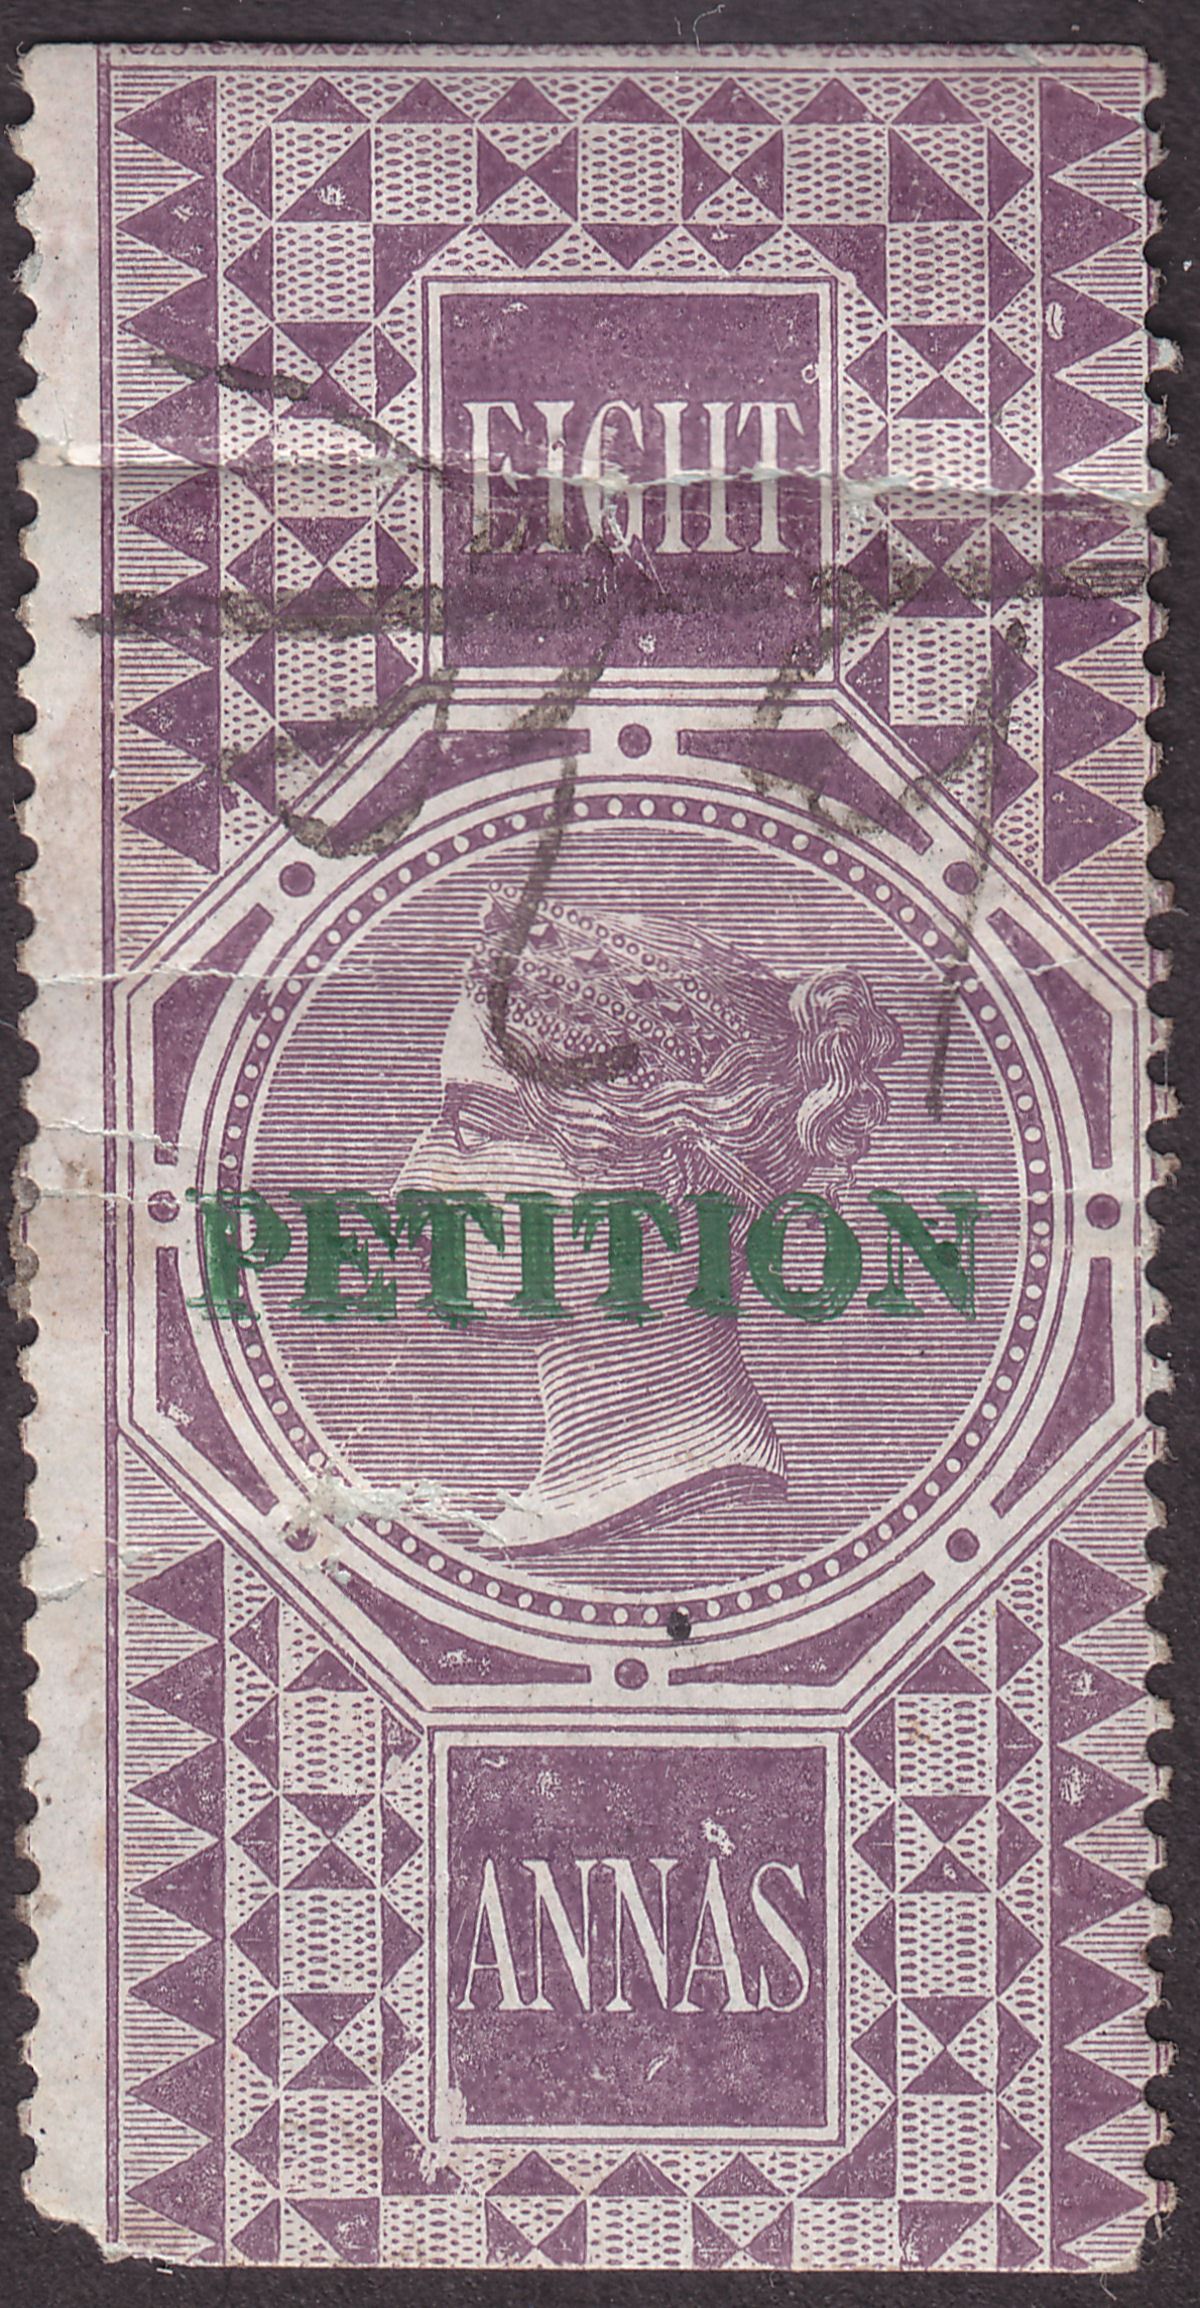 India 1867 QV Revenue Petition Overprint Doubled on Foreign Bill 8a Used BF4a